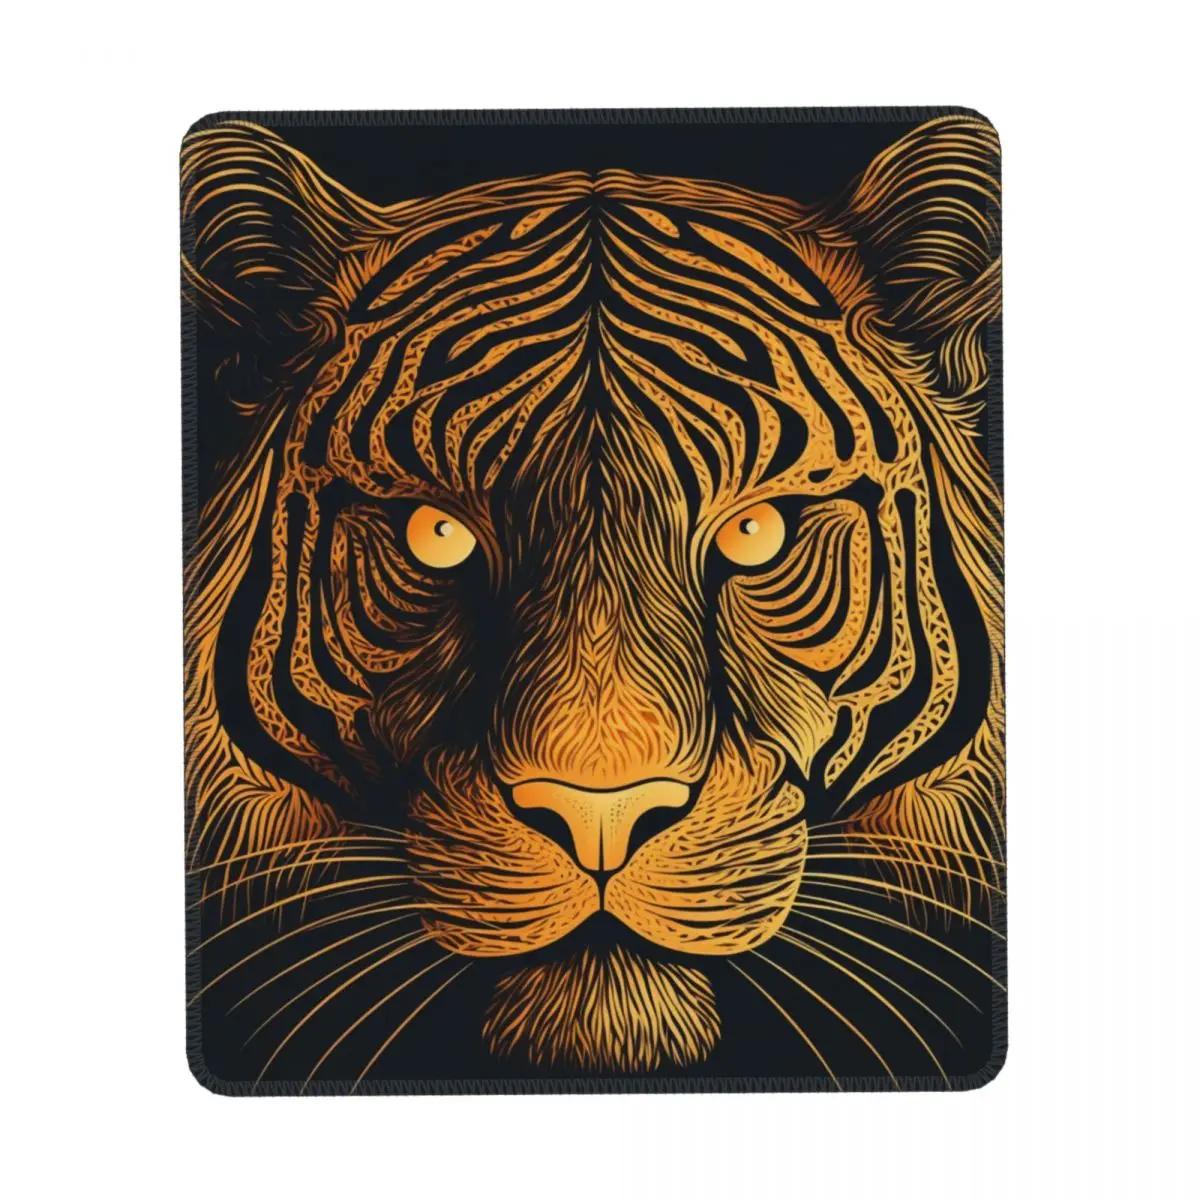 

Tiger Vertical Print Mouse Pad Psychedelic Lines Portraits Rubber Desktop Mousepad Anti-Slip Aesthetic Quality Mouse Pads